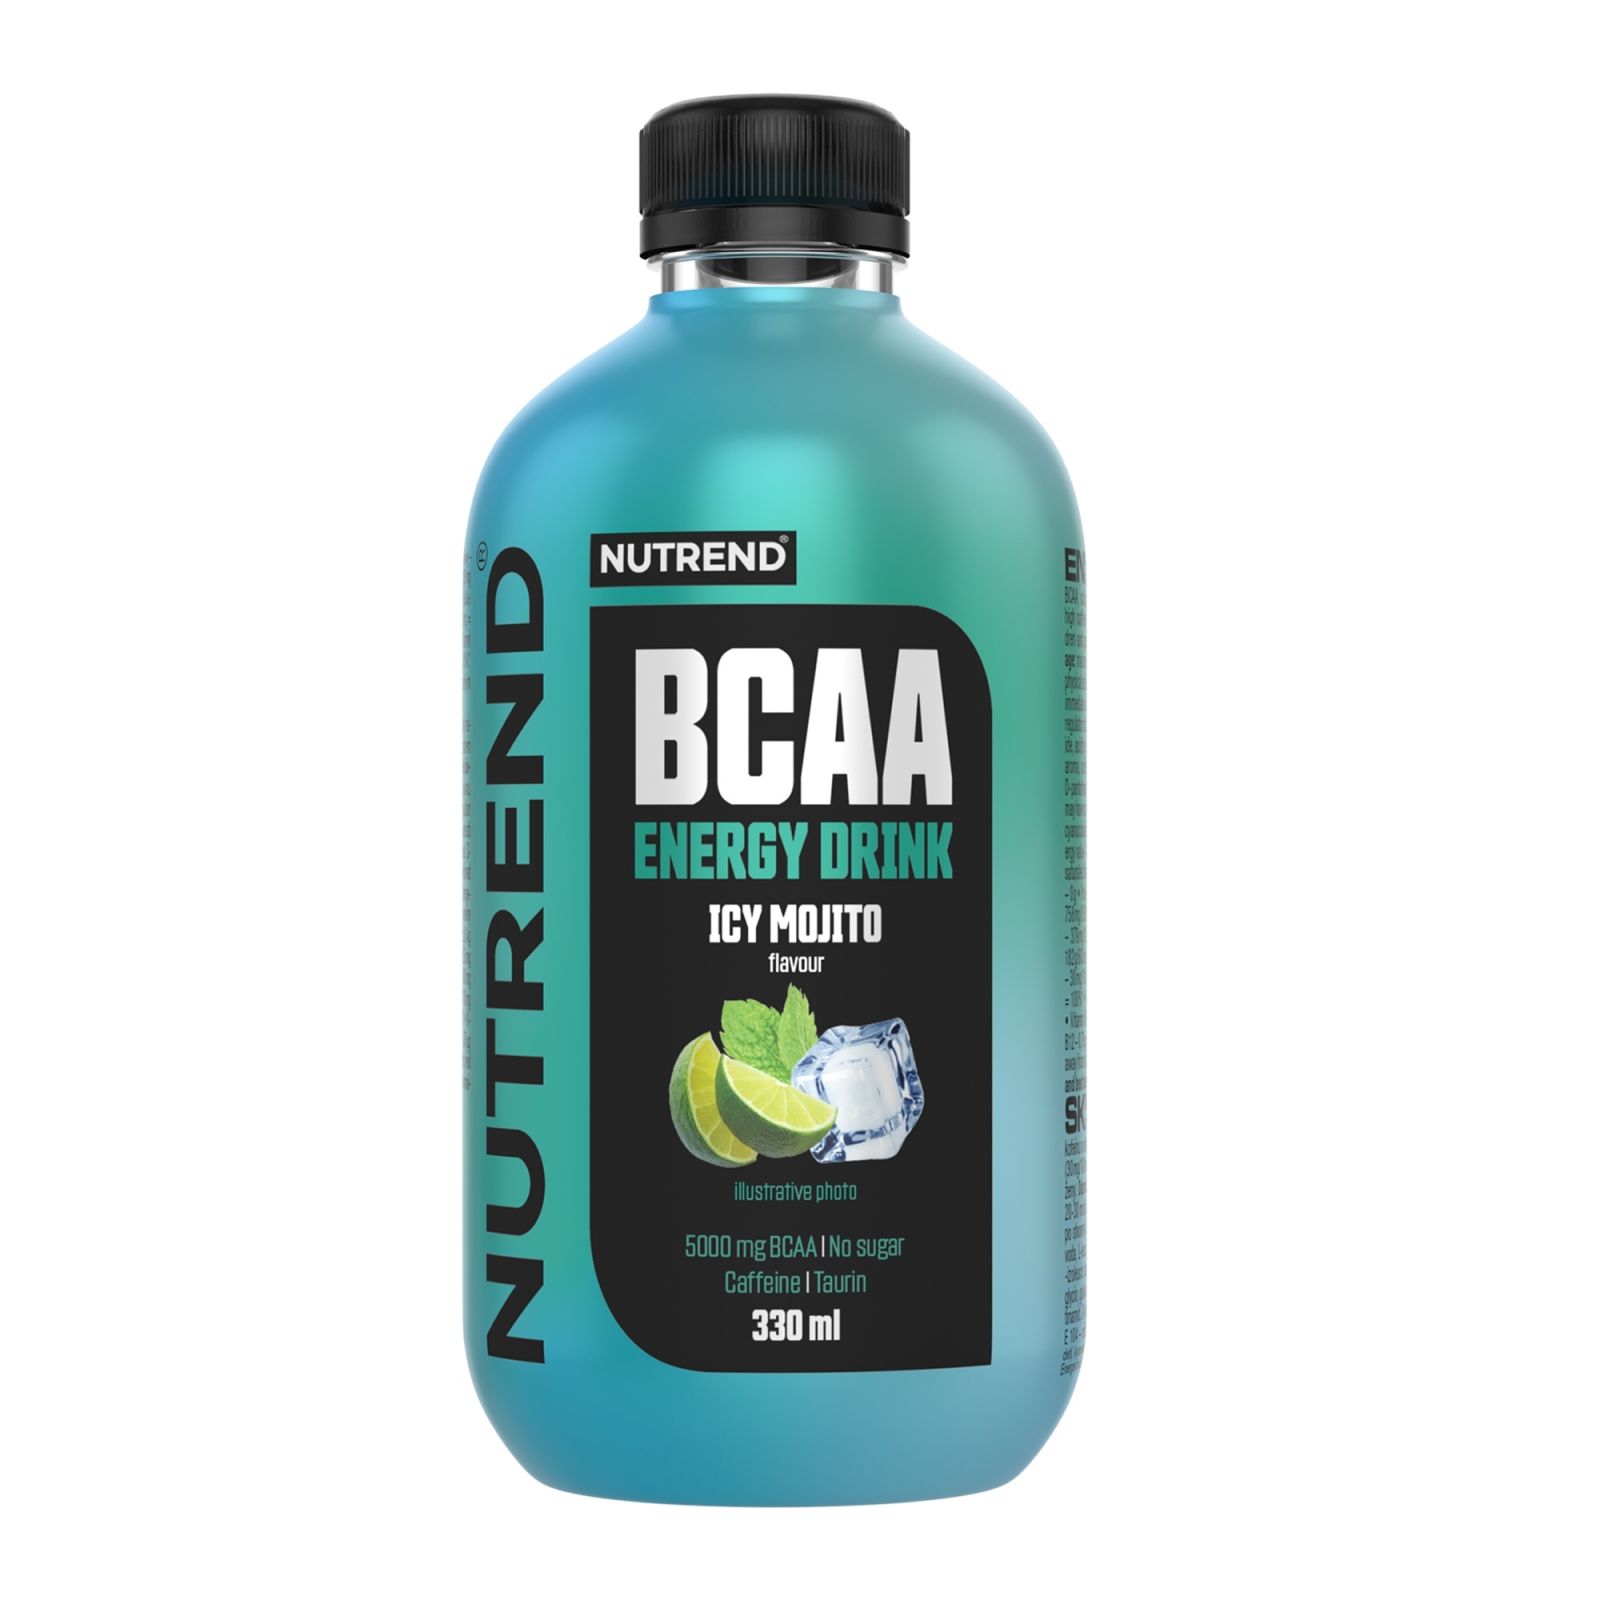 BCAA Energy Drink, 330 ml icy mojito NUTREND